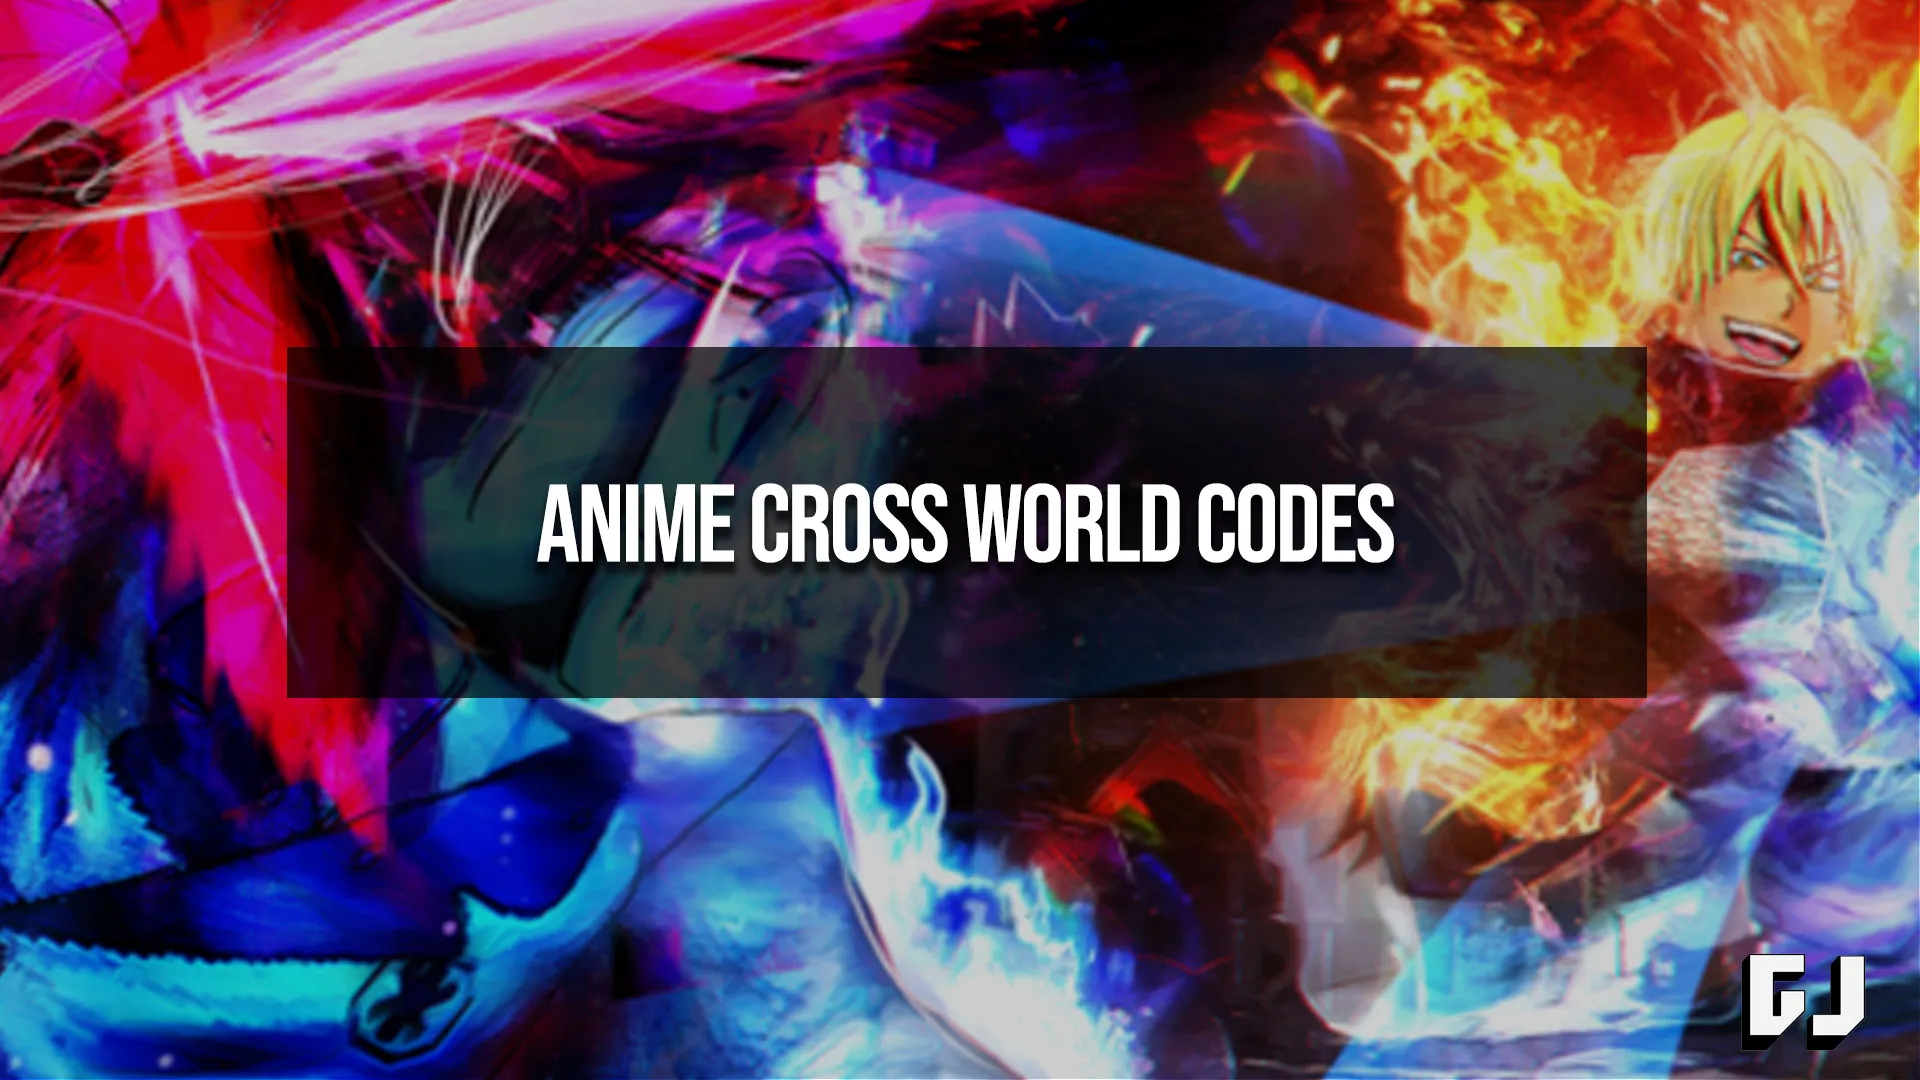 Anime Cross World codes – free rolls, XP boosts, and more